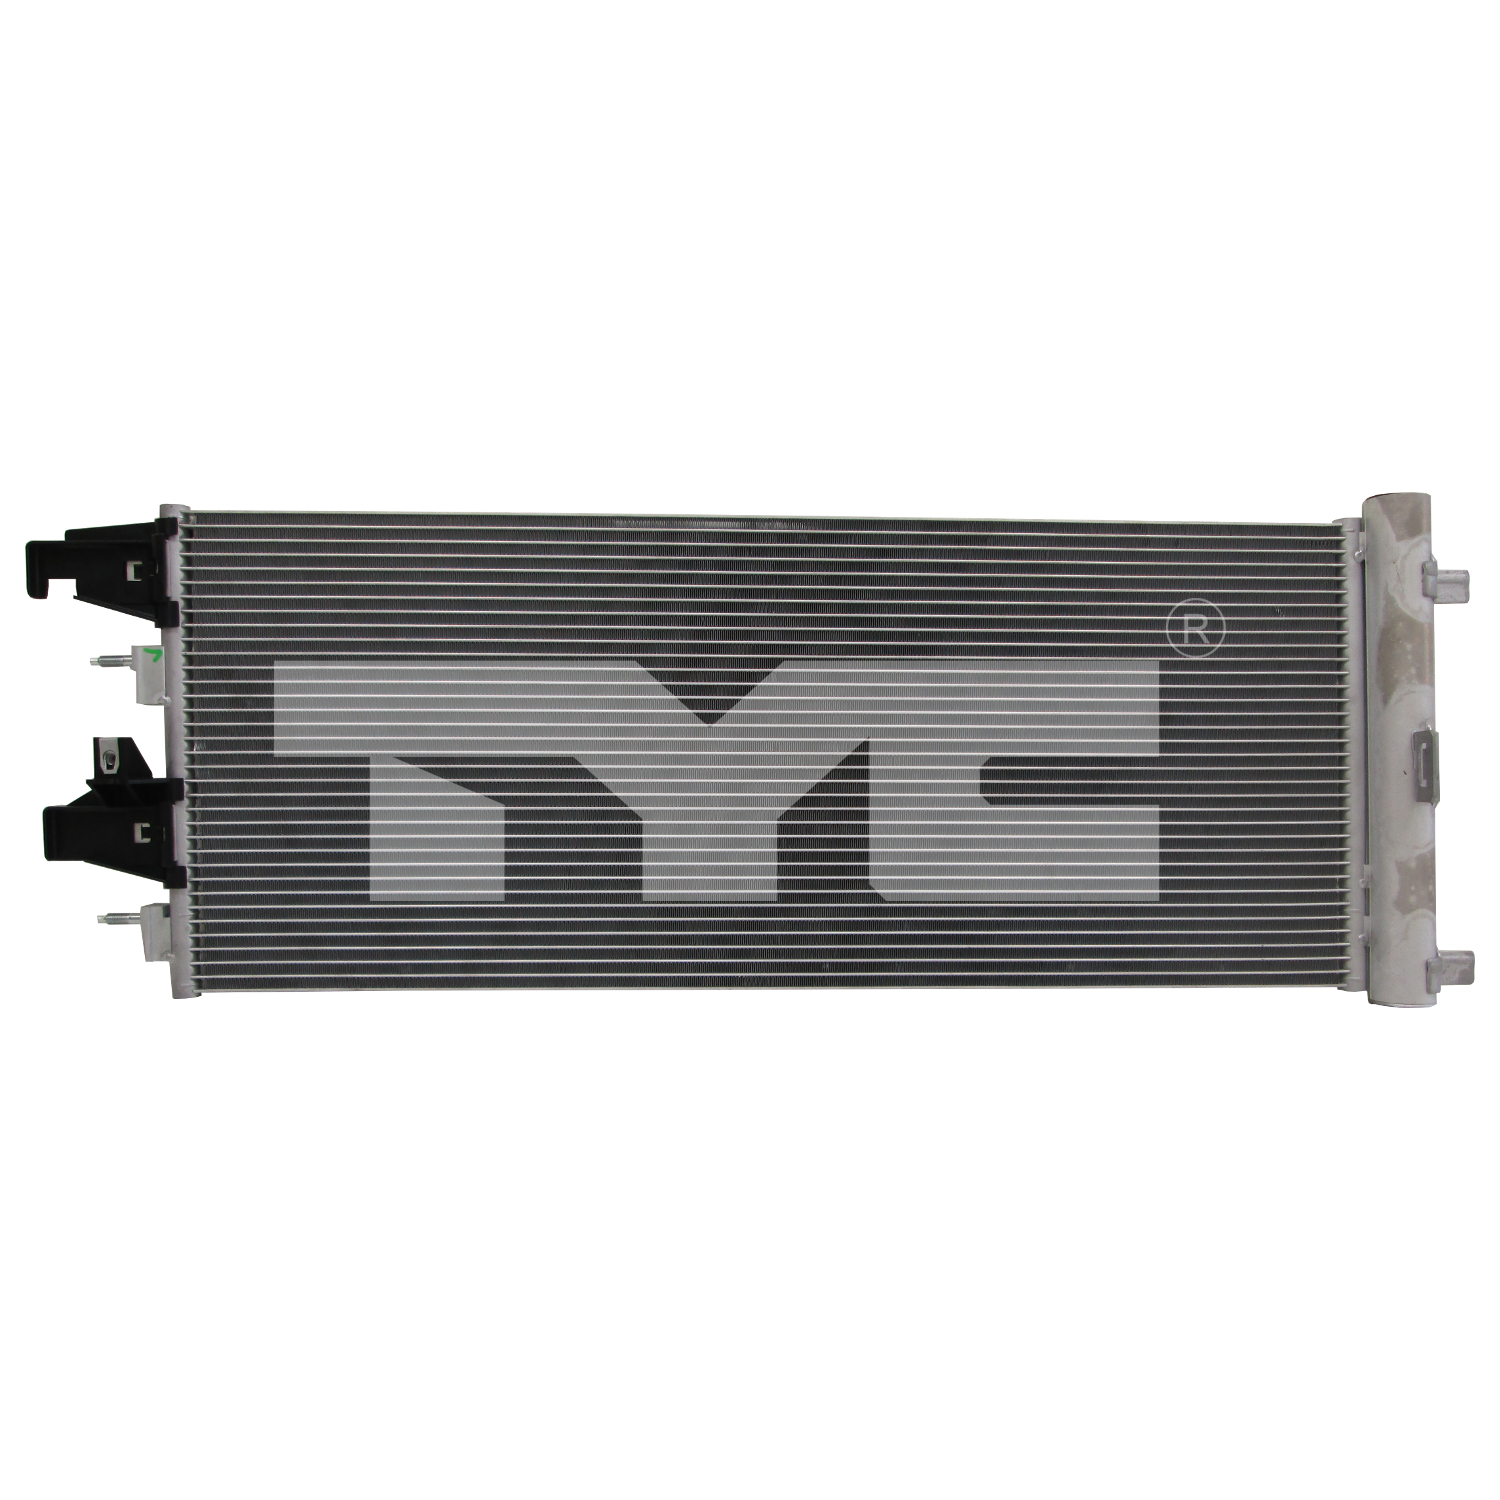 Aftermarket AC CONDENSERS for GMC - SIERRA 1500 LIMITED, SIERRA 1500 LIMITED,22-22,Air conditioning condenser